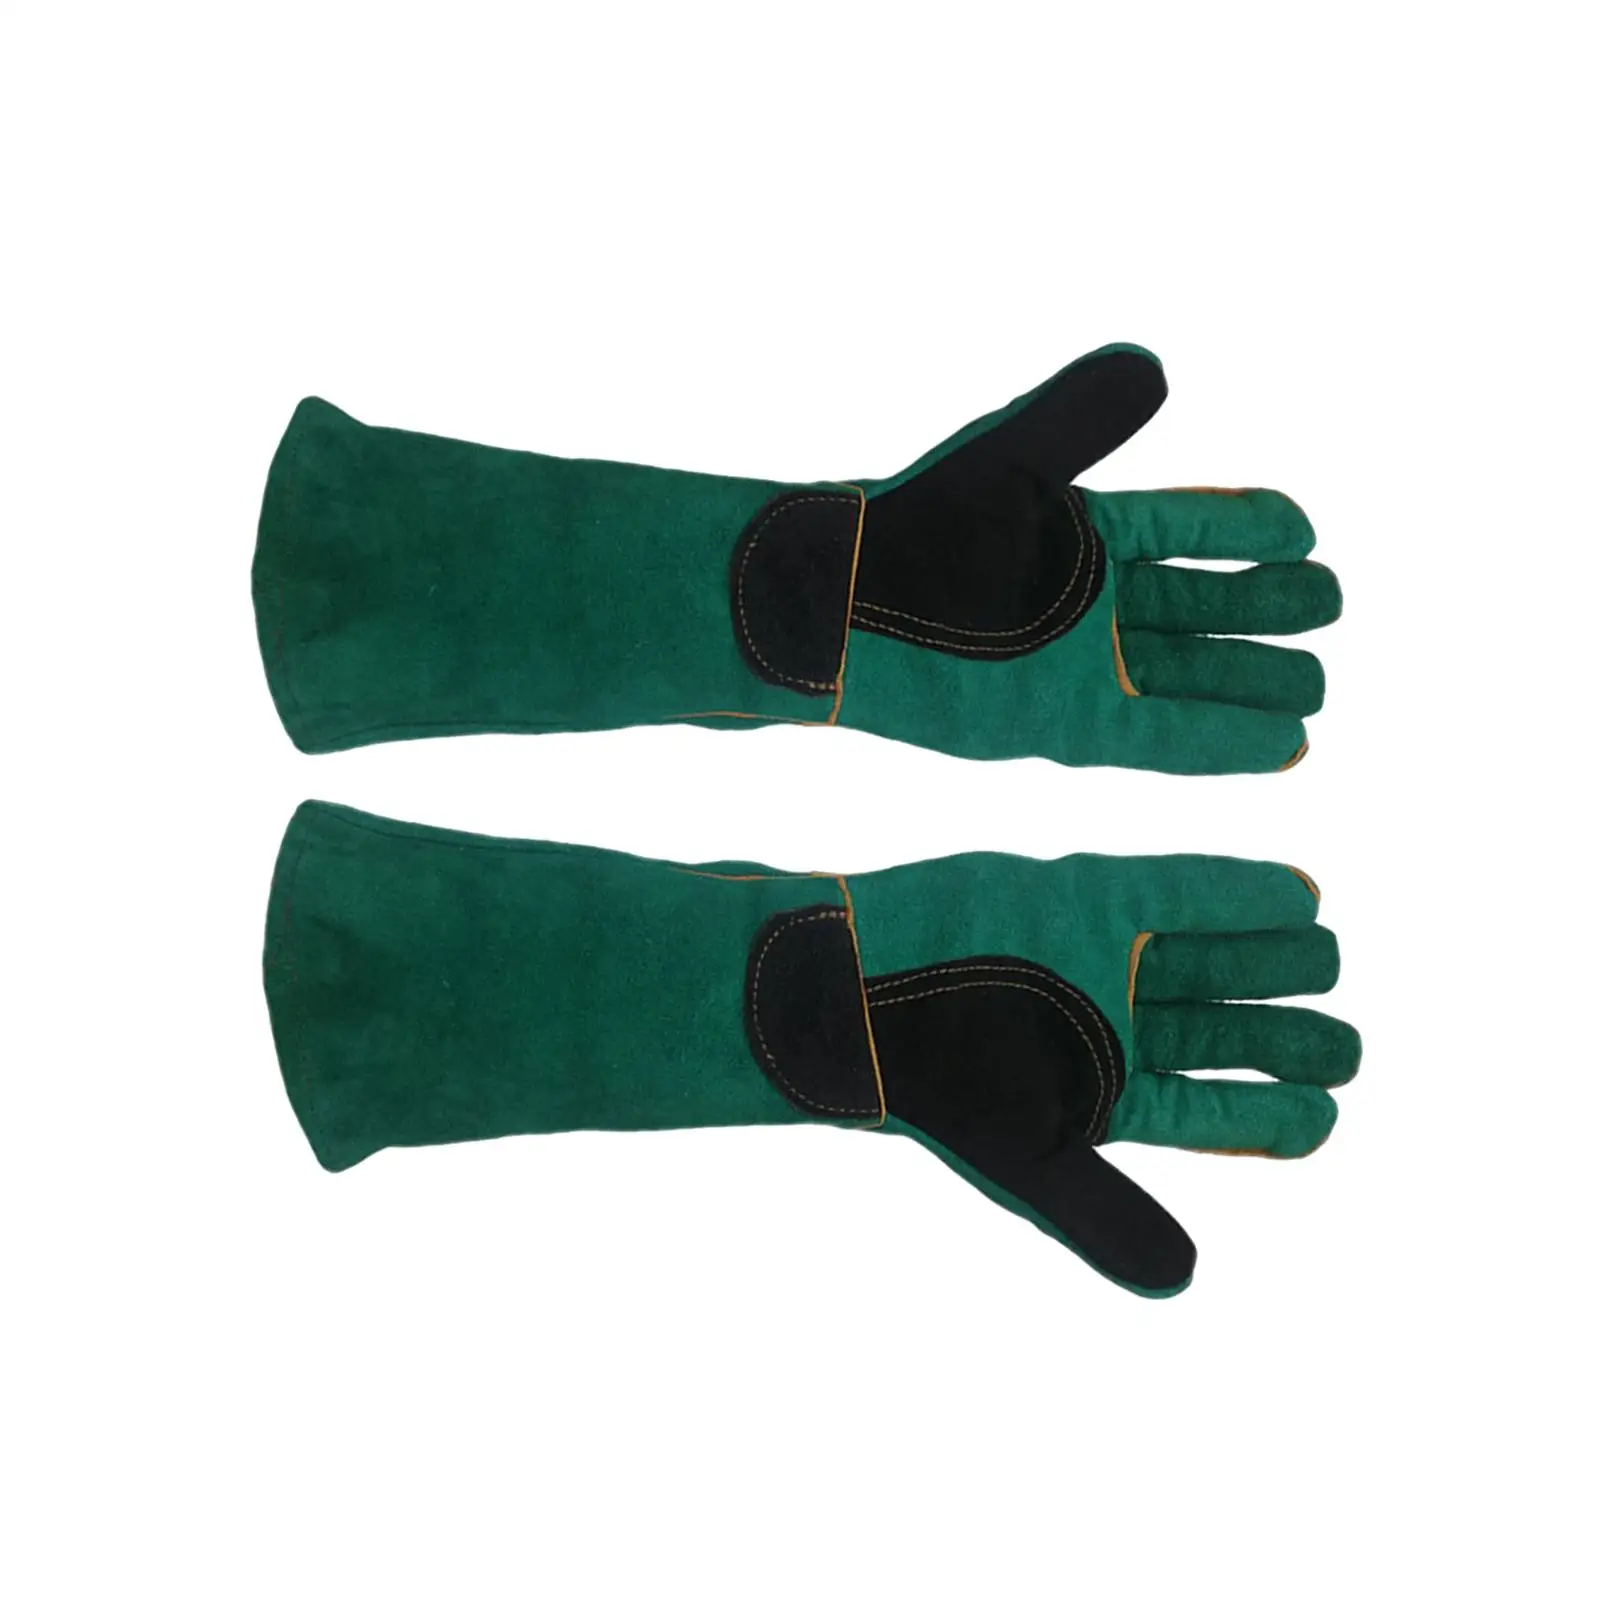 43cm Animal Handling Gloves Pet Supplies Reinforced Leather Padding Bite Resistant Protective for Zoo Worker Bird Dog Parrot Cat